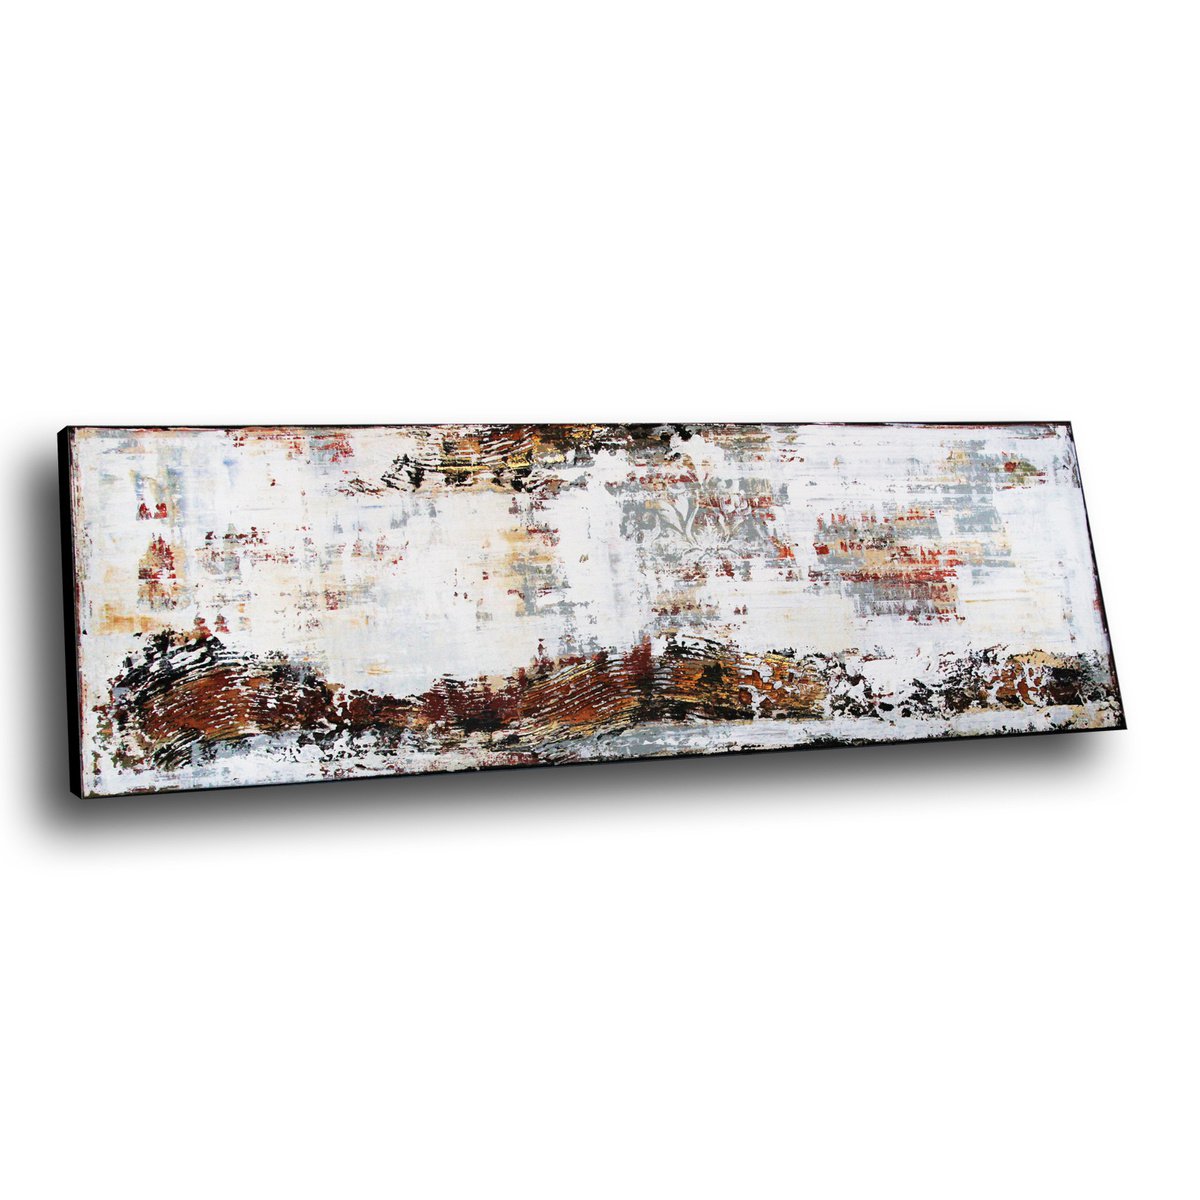 EXCITING JOURNEY - 59 x 19.7 - ABSTRACT PAINTING WITH STRUCTURES - WHITE BEIGE GOLD by Inez Froehlich